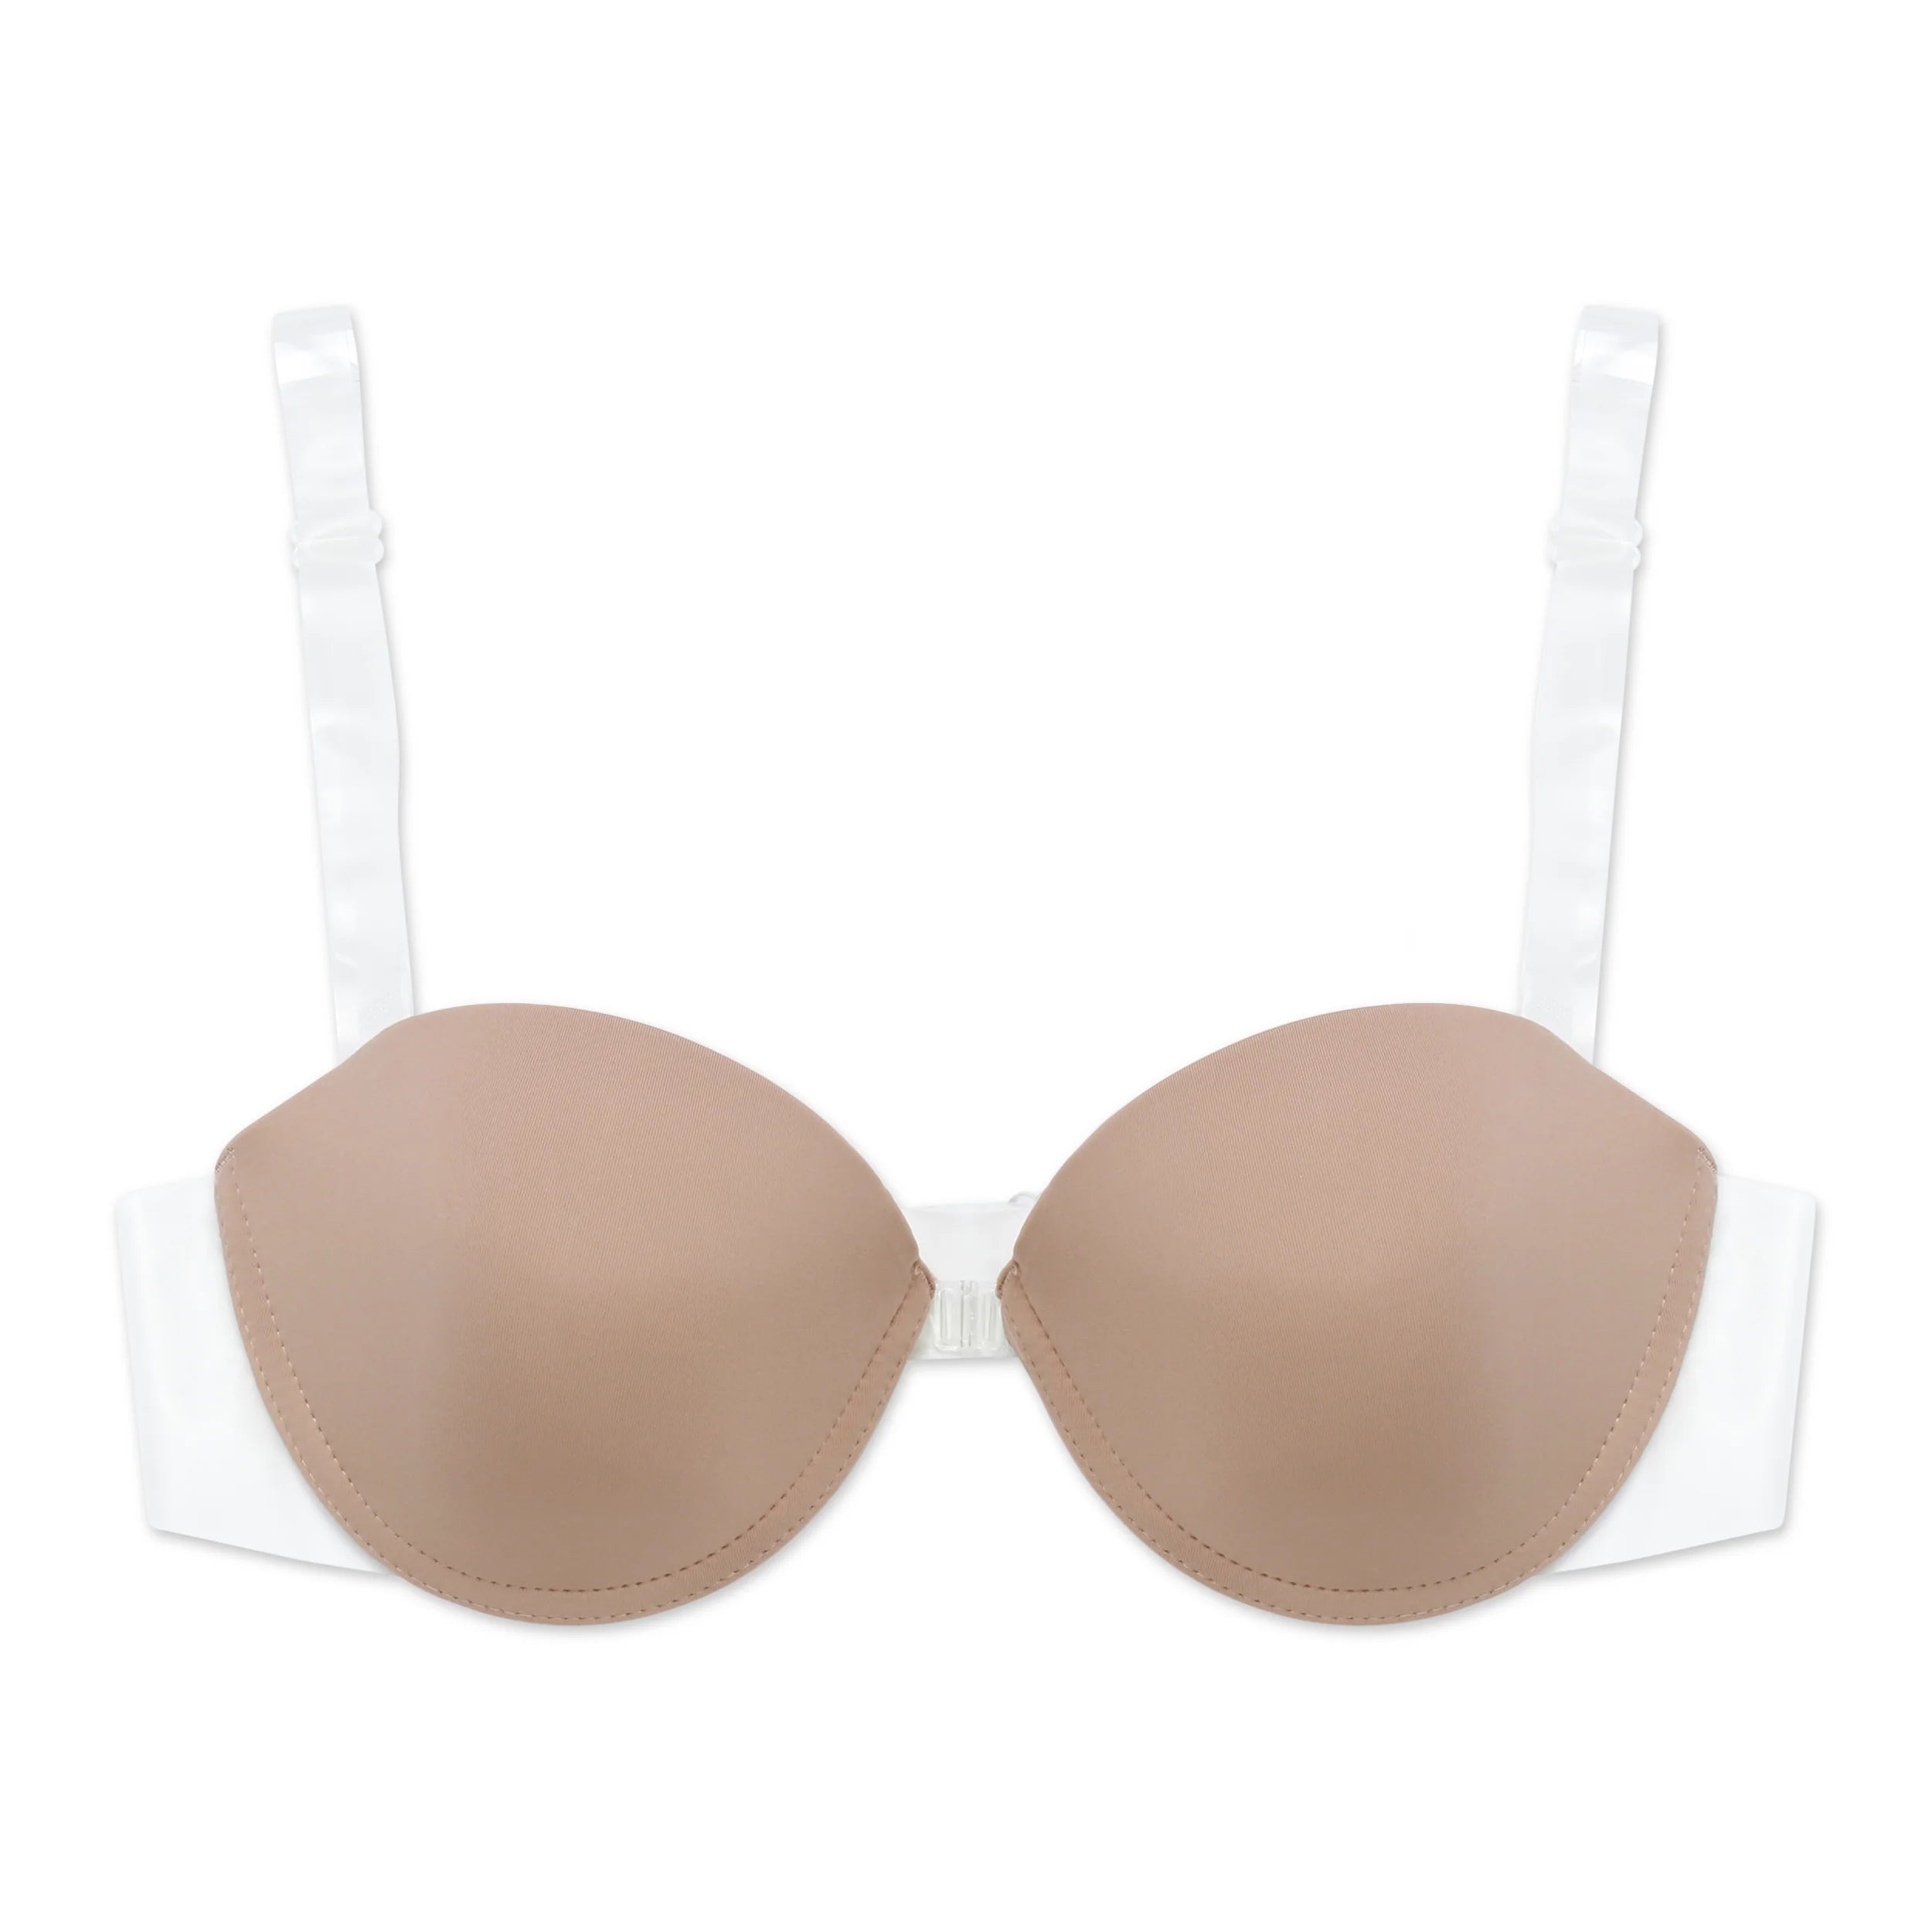 Buy Nude Clear Bra Straps from Next USA